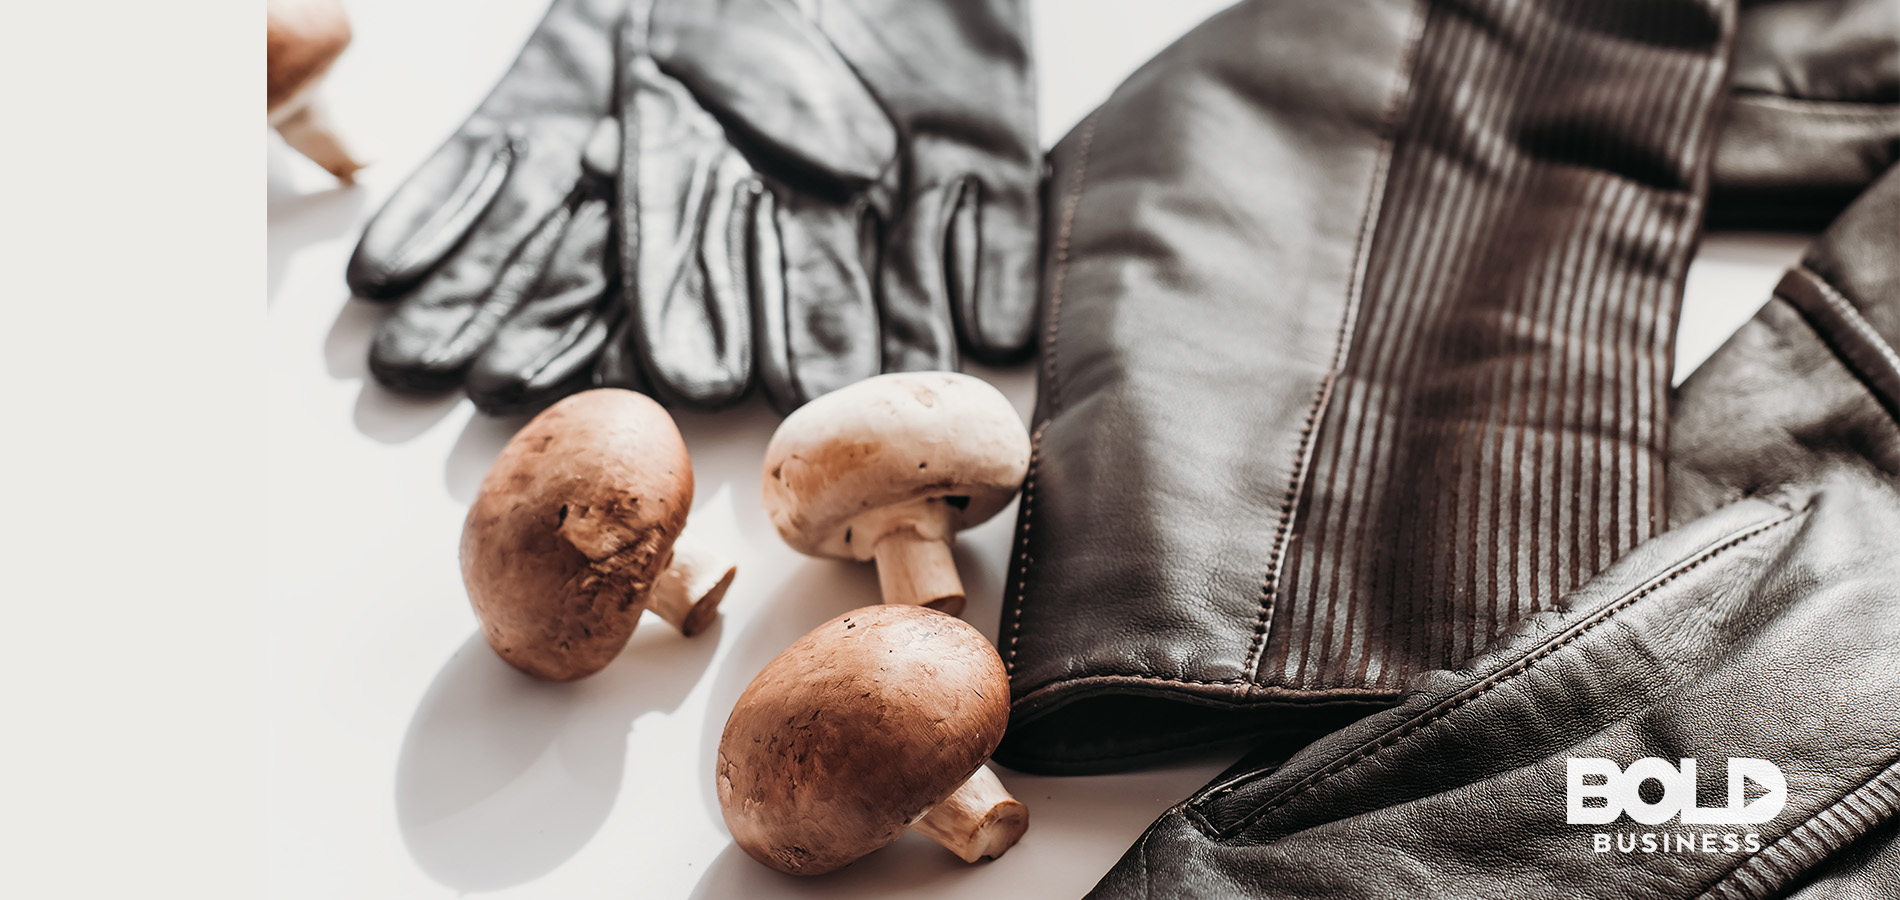 Mushrooms lying next to some leather, making them sustainable leather alternatives